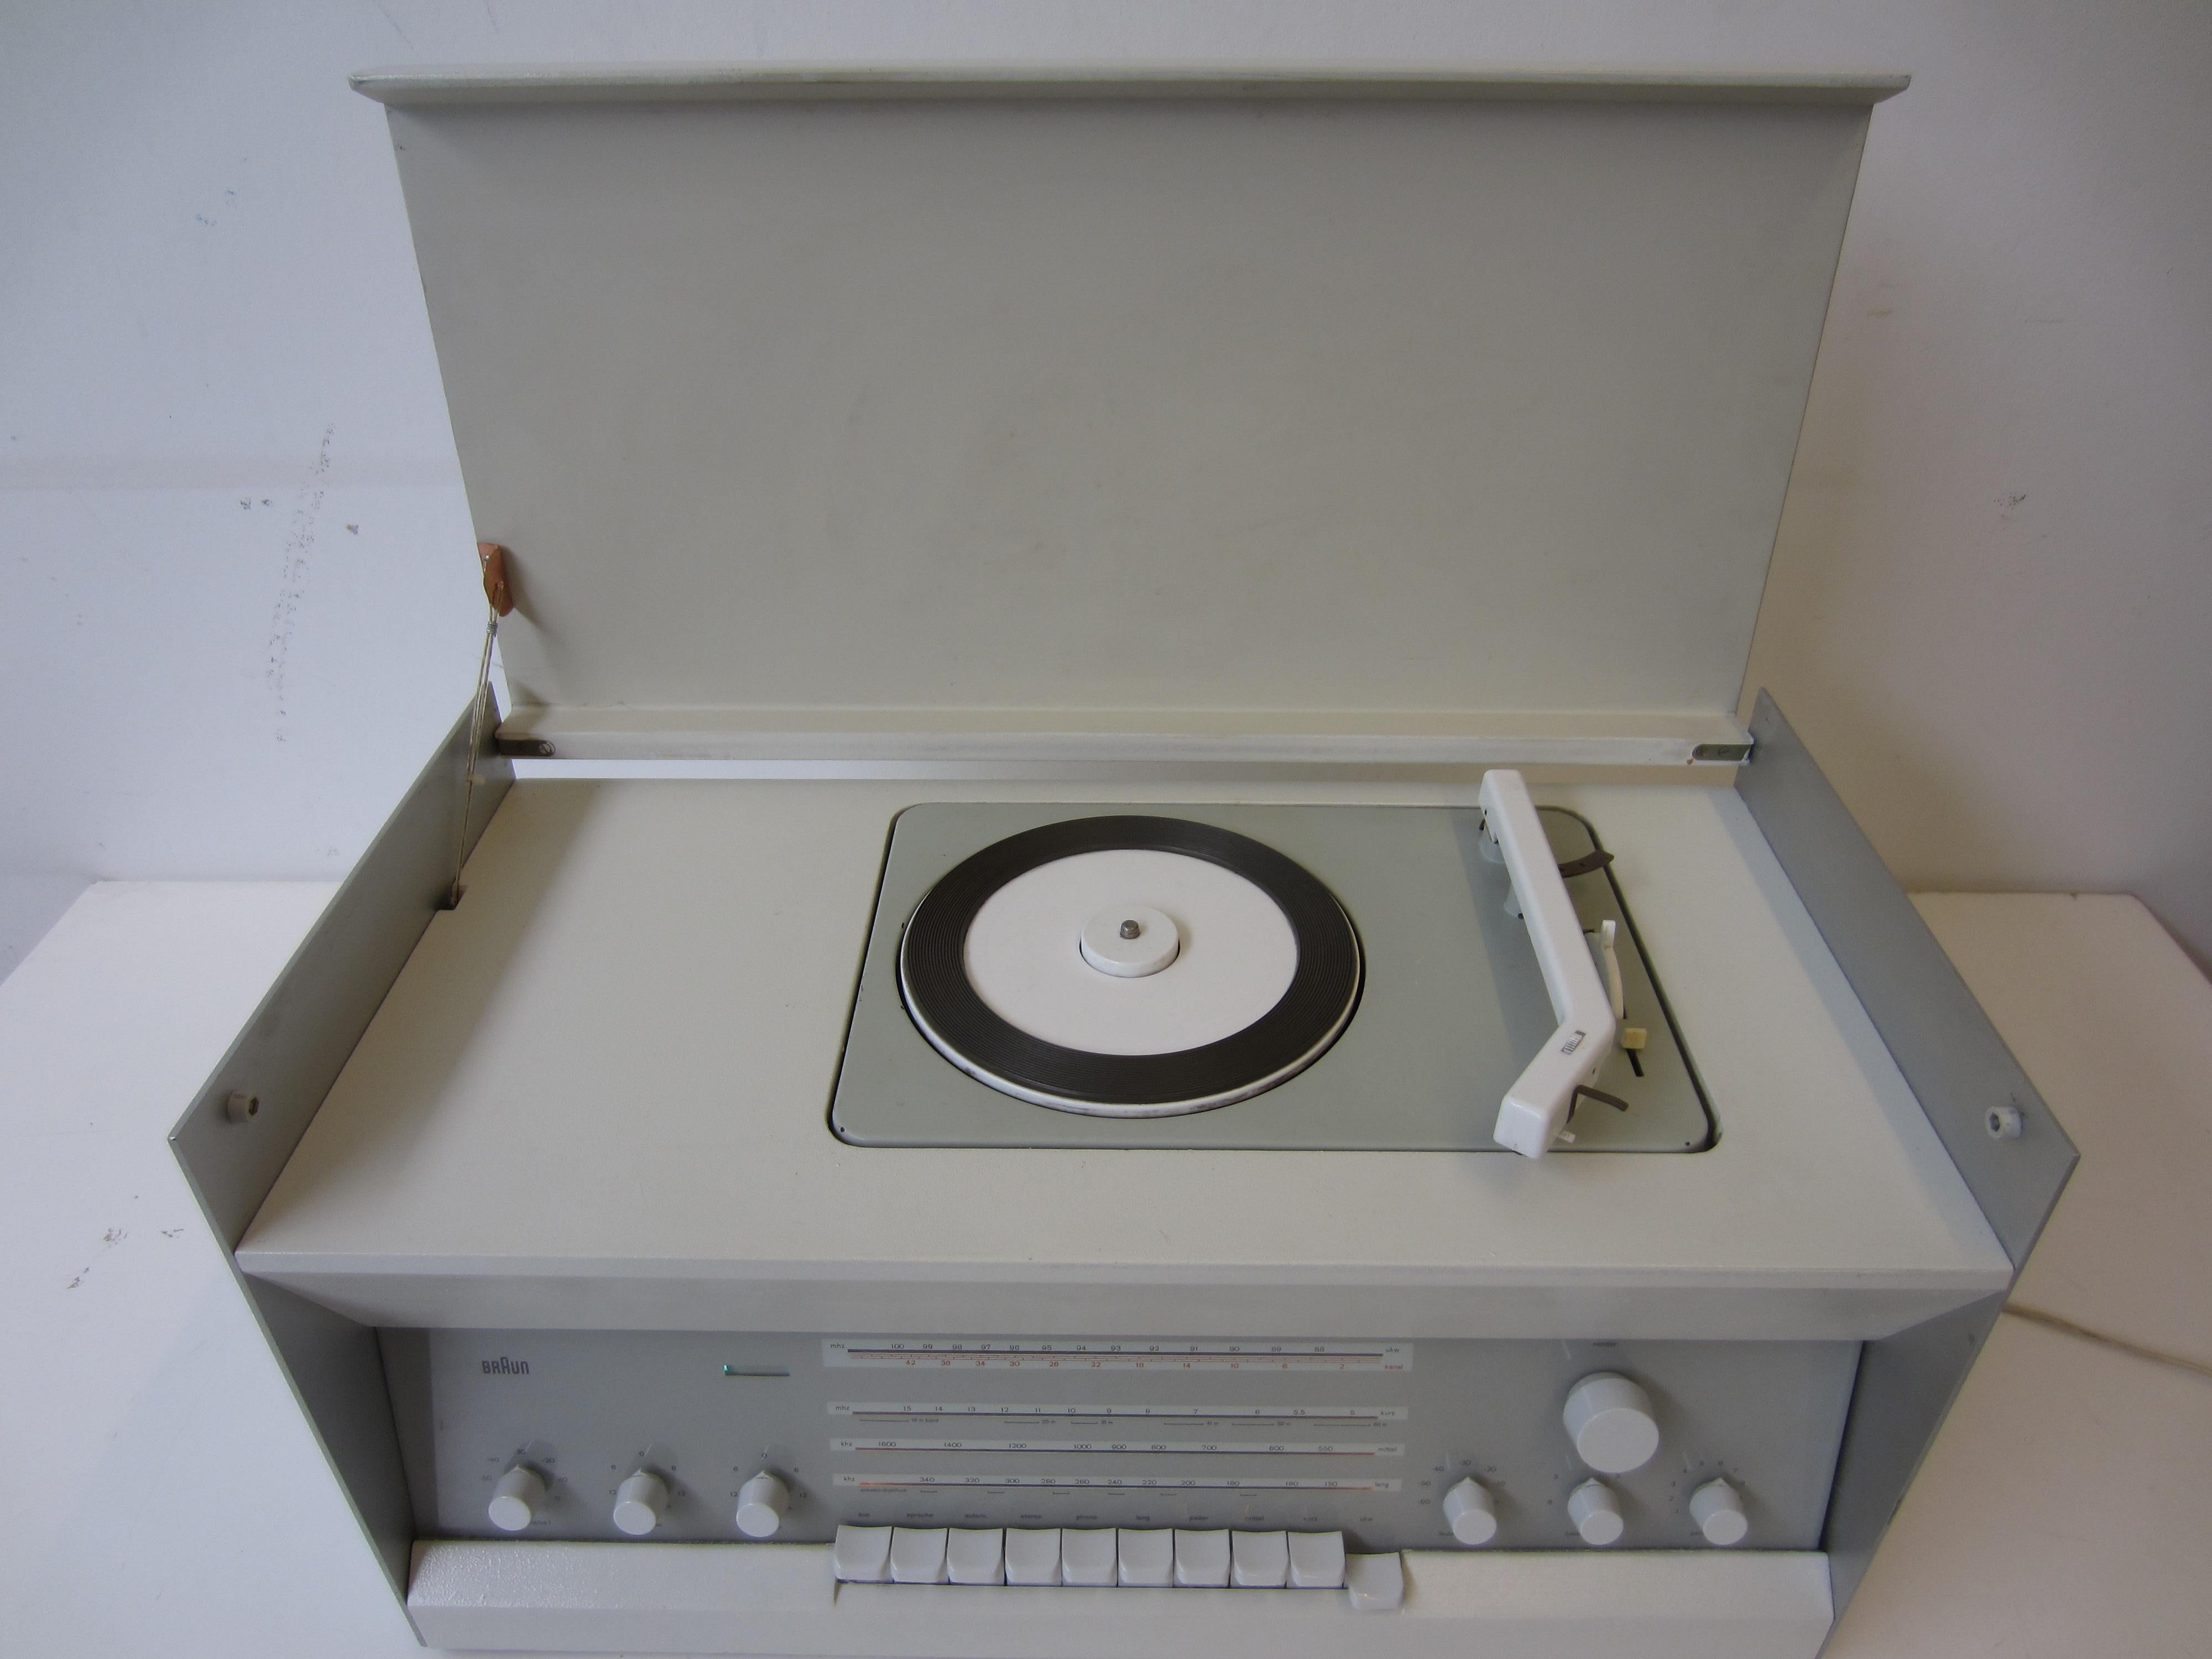 Braun Atelier 3 turntable and radio, model RC 9E designed by Dieter Rams.
Produced by Braun in 1969 and is part of the Atelier project, which replaced aluminum with an asymmetrical face to the receiver module. This transition from natural materials